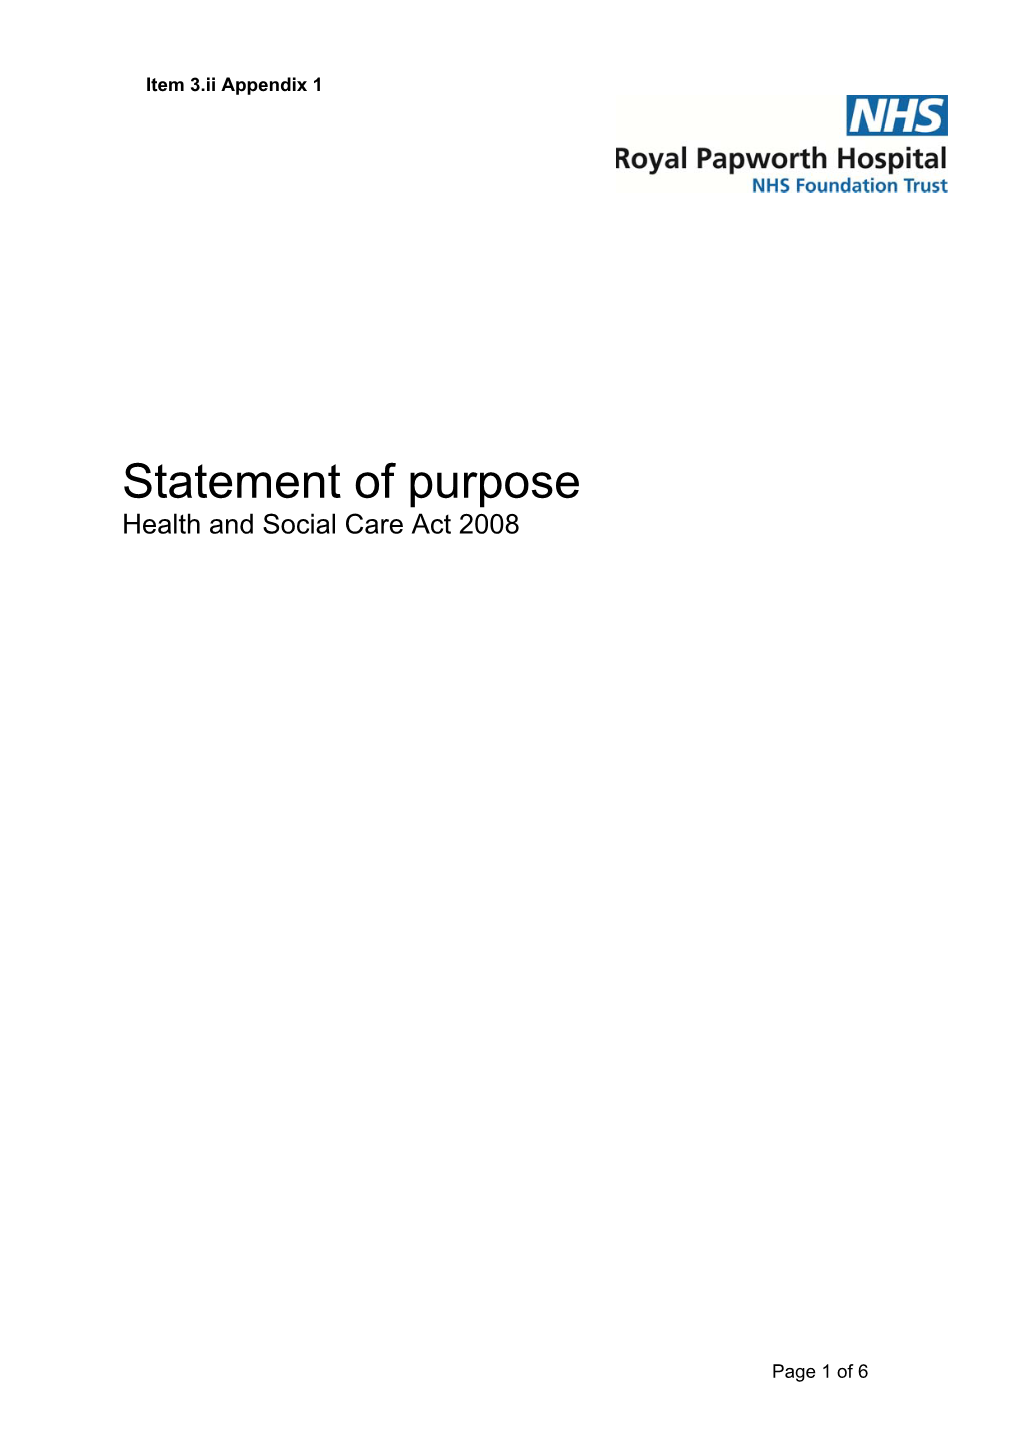 Statement of Purpose Health and Social Care Act 2008